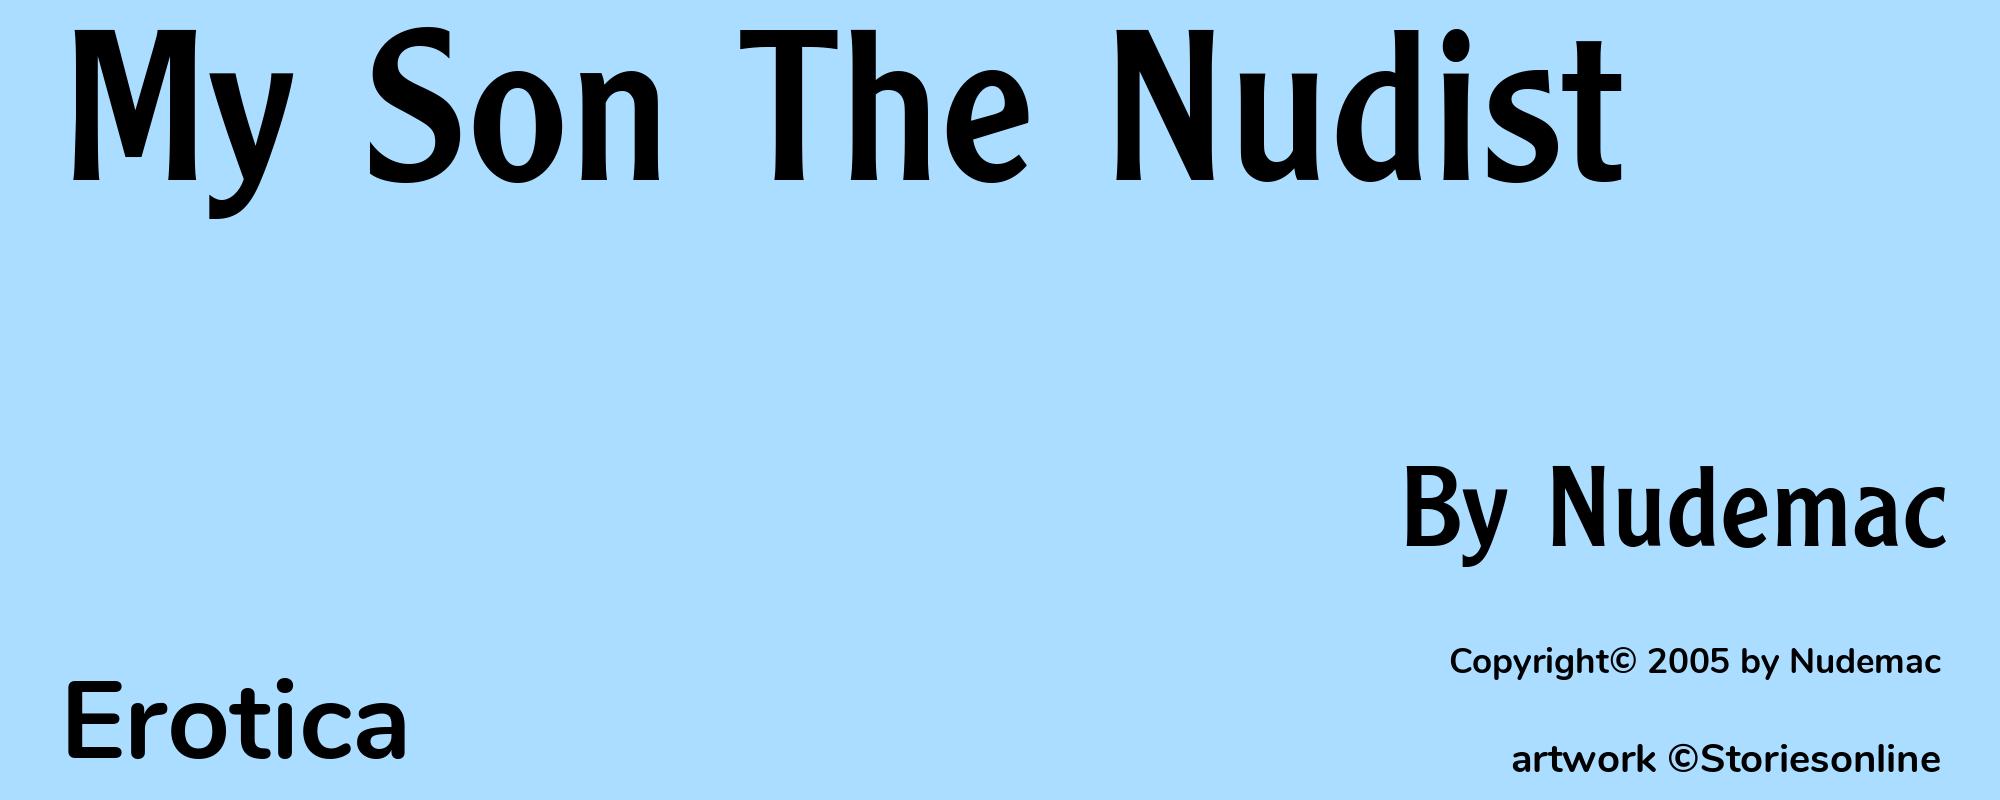 My Son The Nudist - Cover